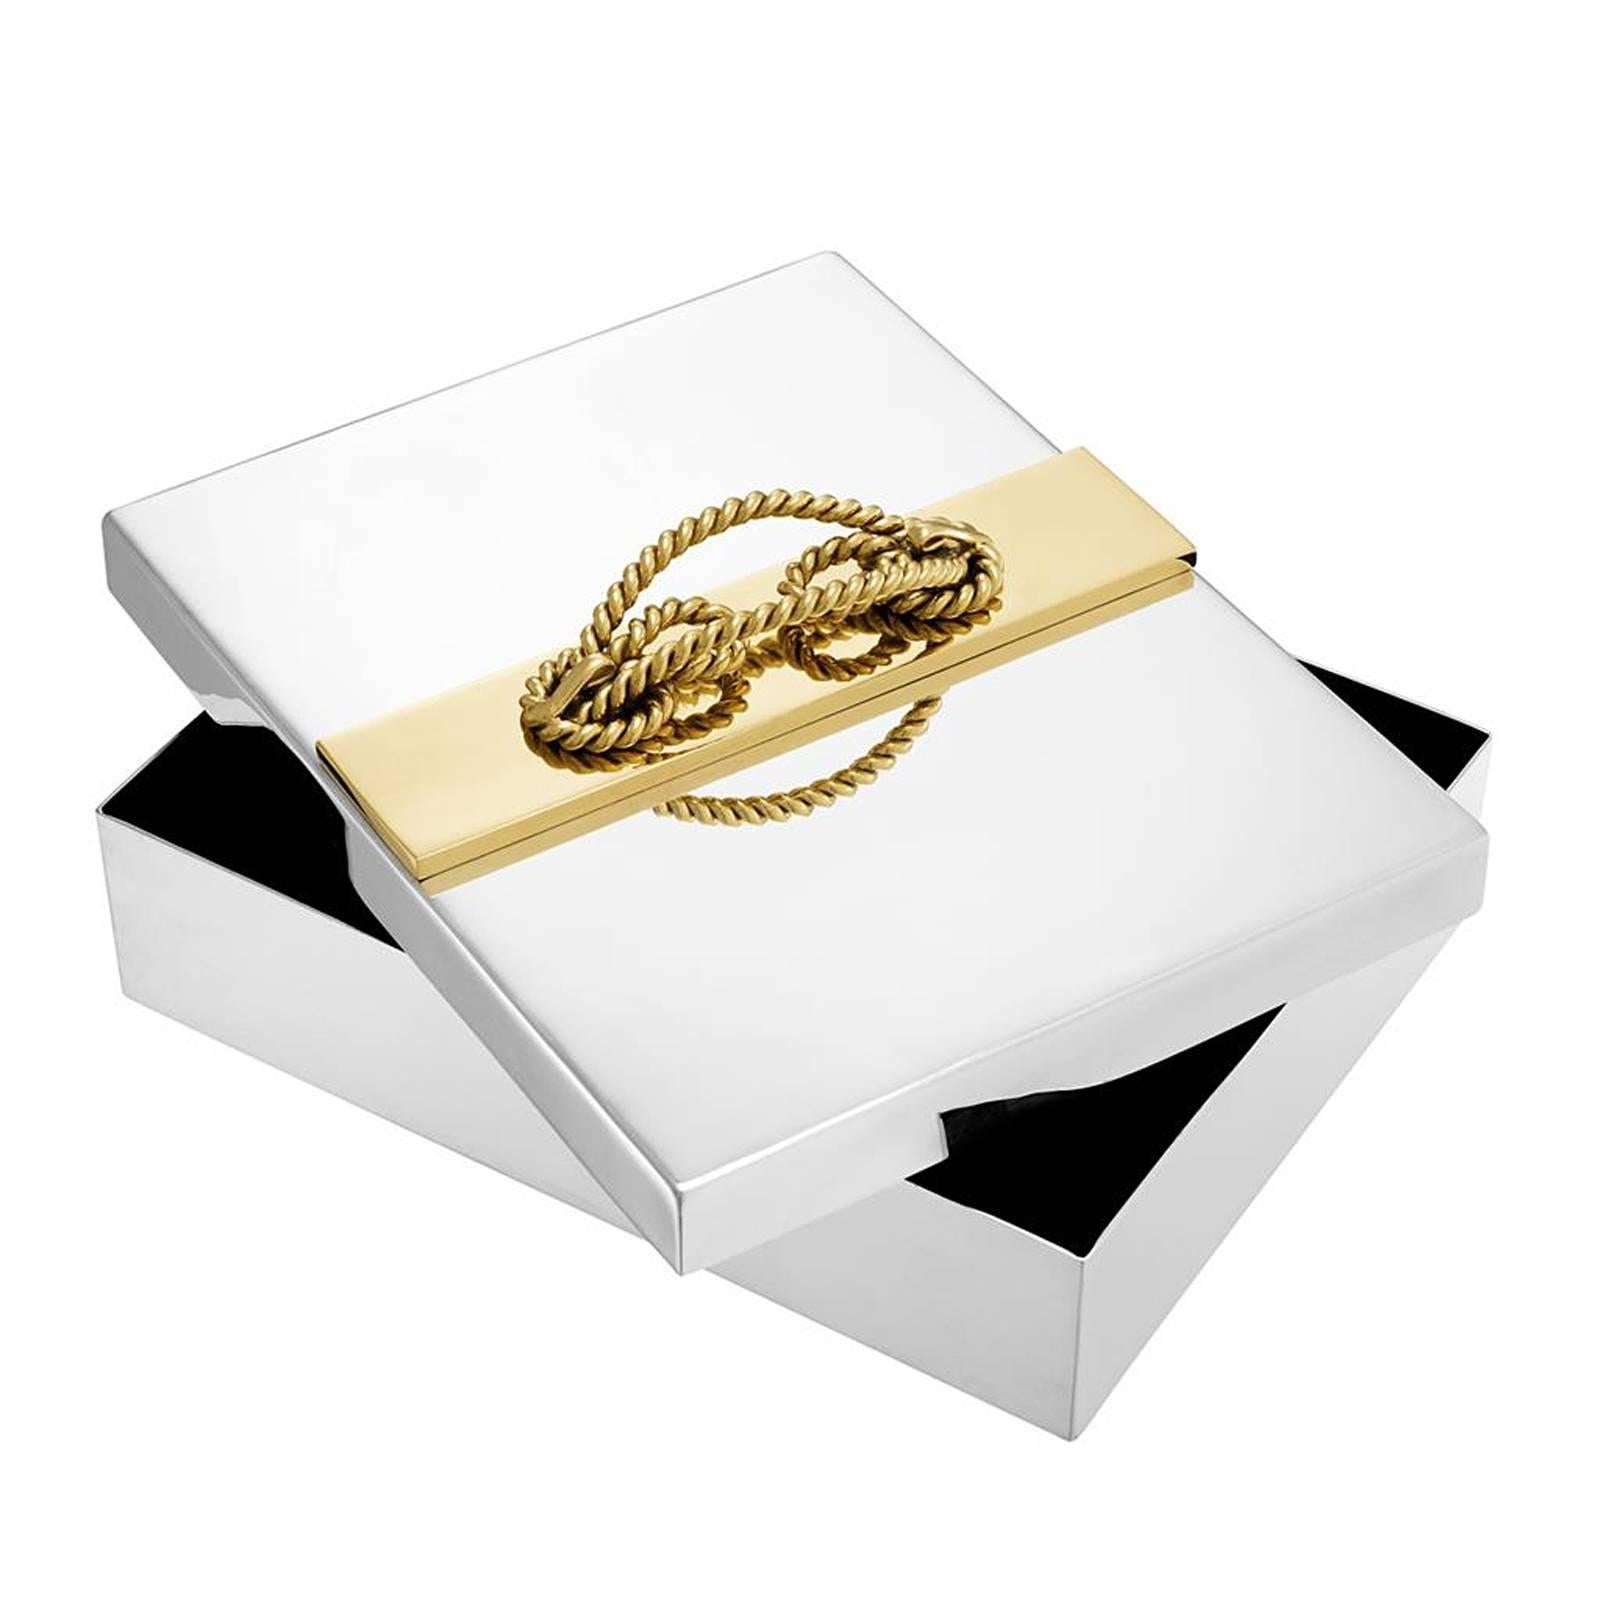 Indian Gold Knot Jewelry Box in Nickel Finish